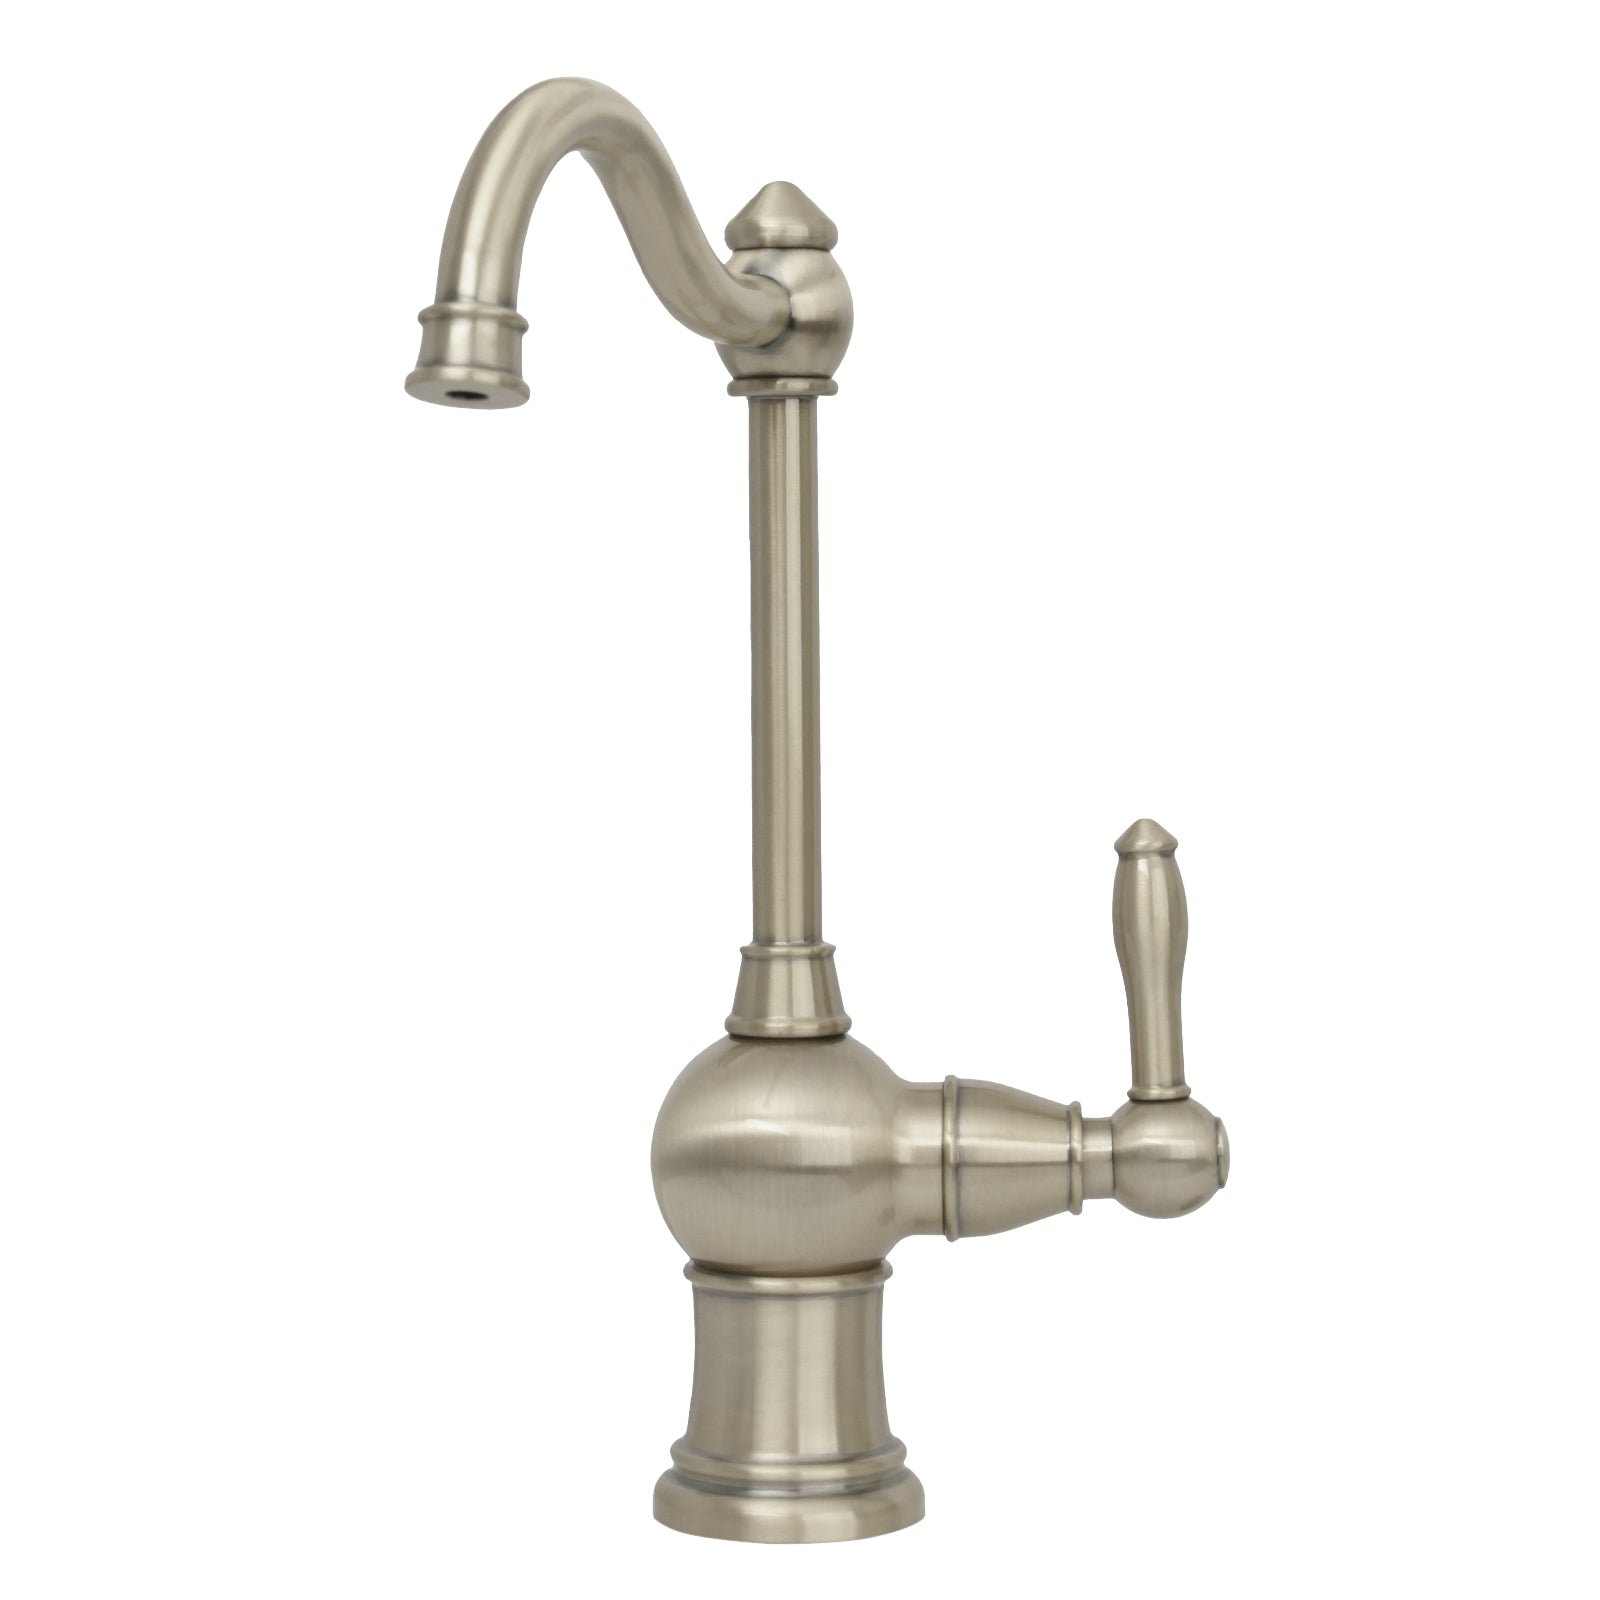 One-Handle Copper Drinking Water Filter Faucet for Instant Hot Water Tank Dispenser & Filtration System - AK97718A1-C